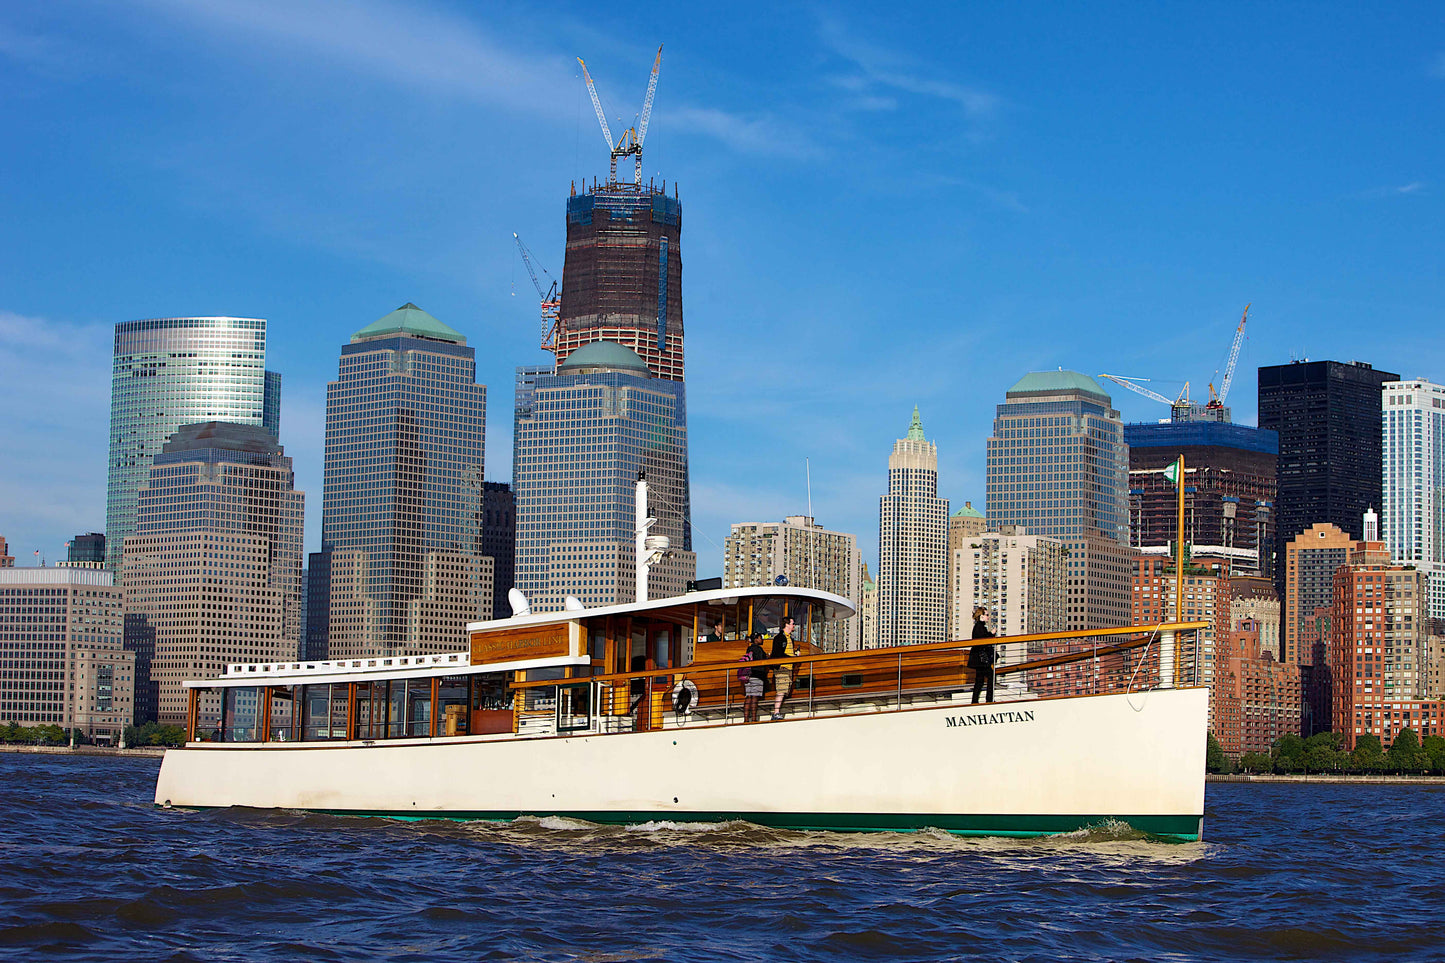 
                  
                    ON-WATER EXPERIENCE: Sunday Race Day on The Yacht Manhattan
                  
                